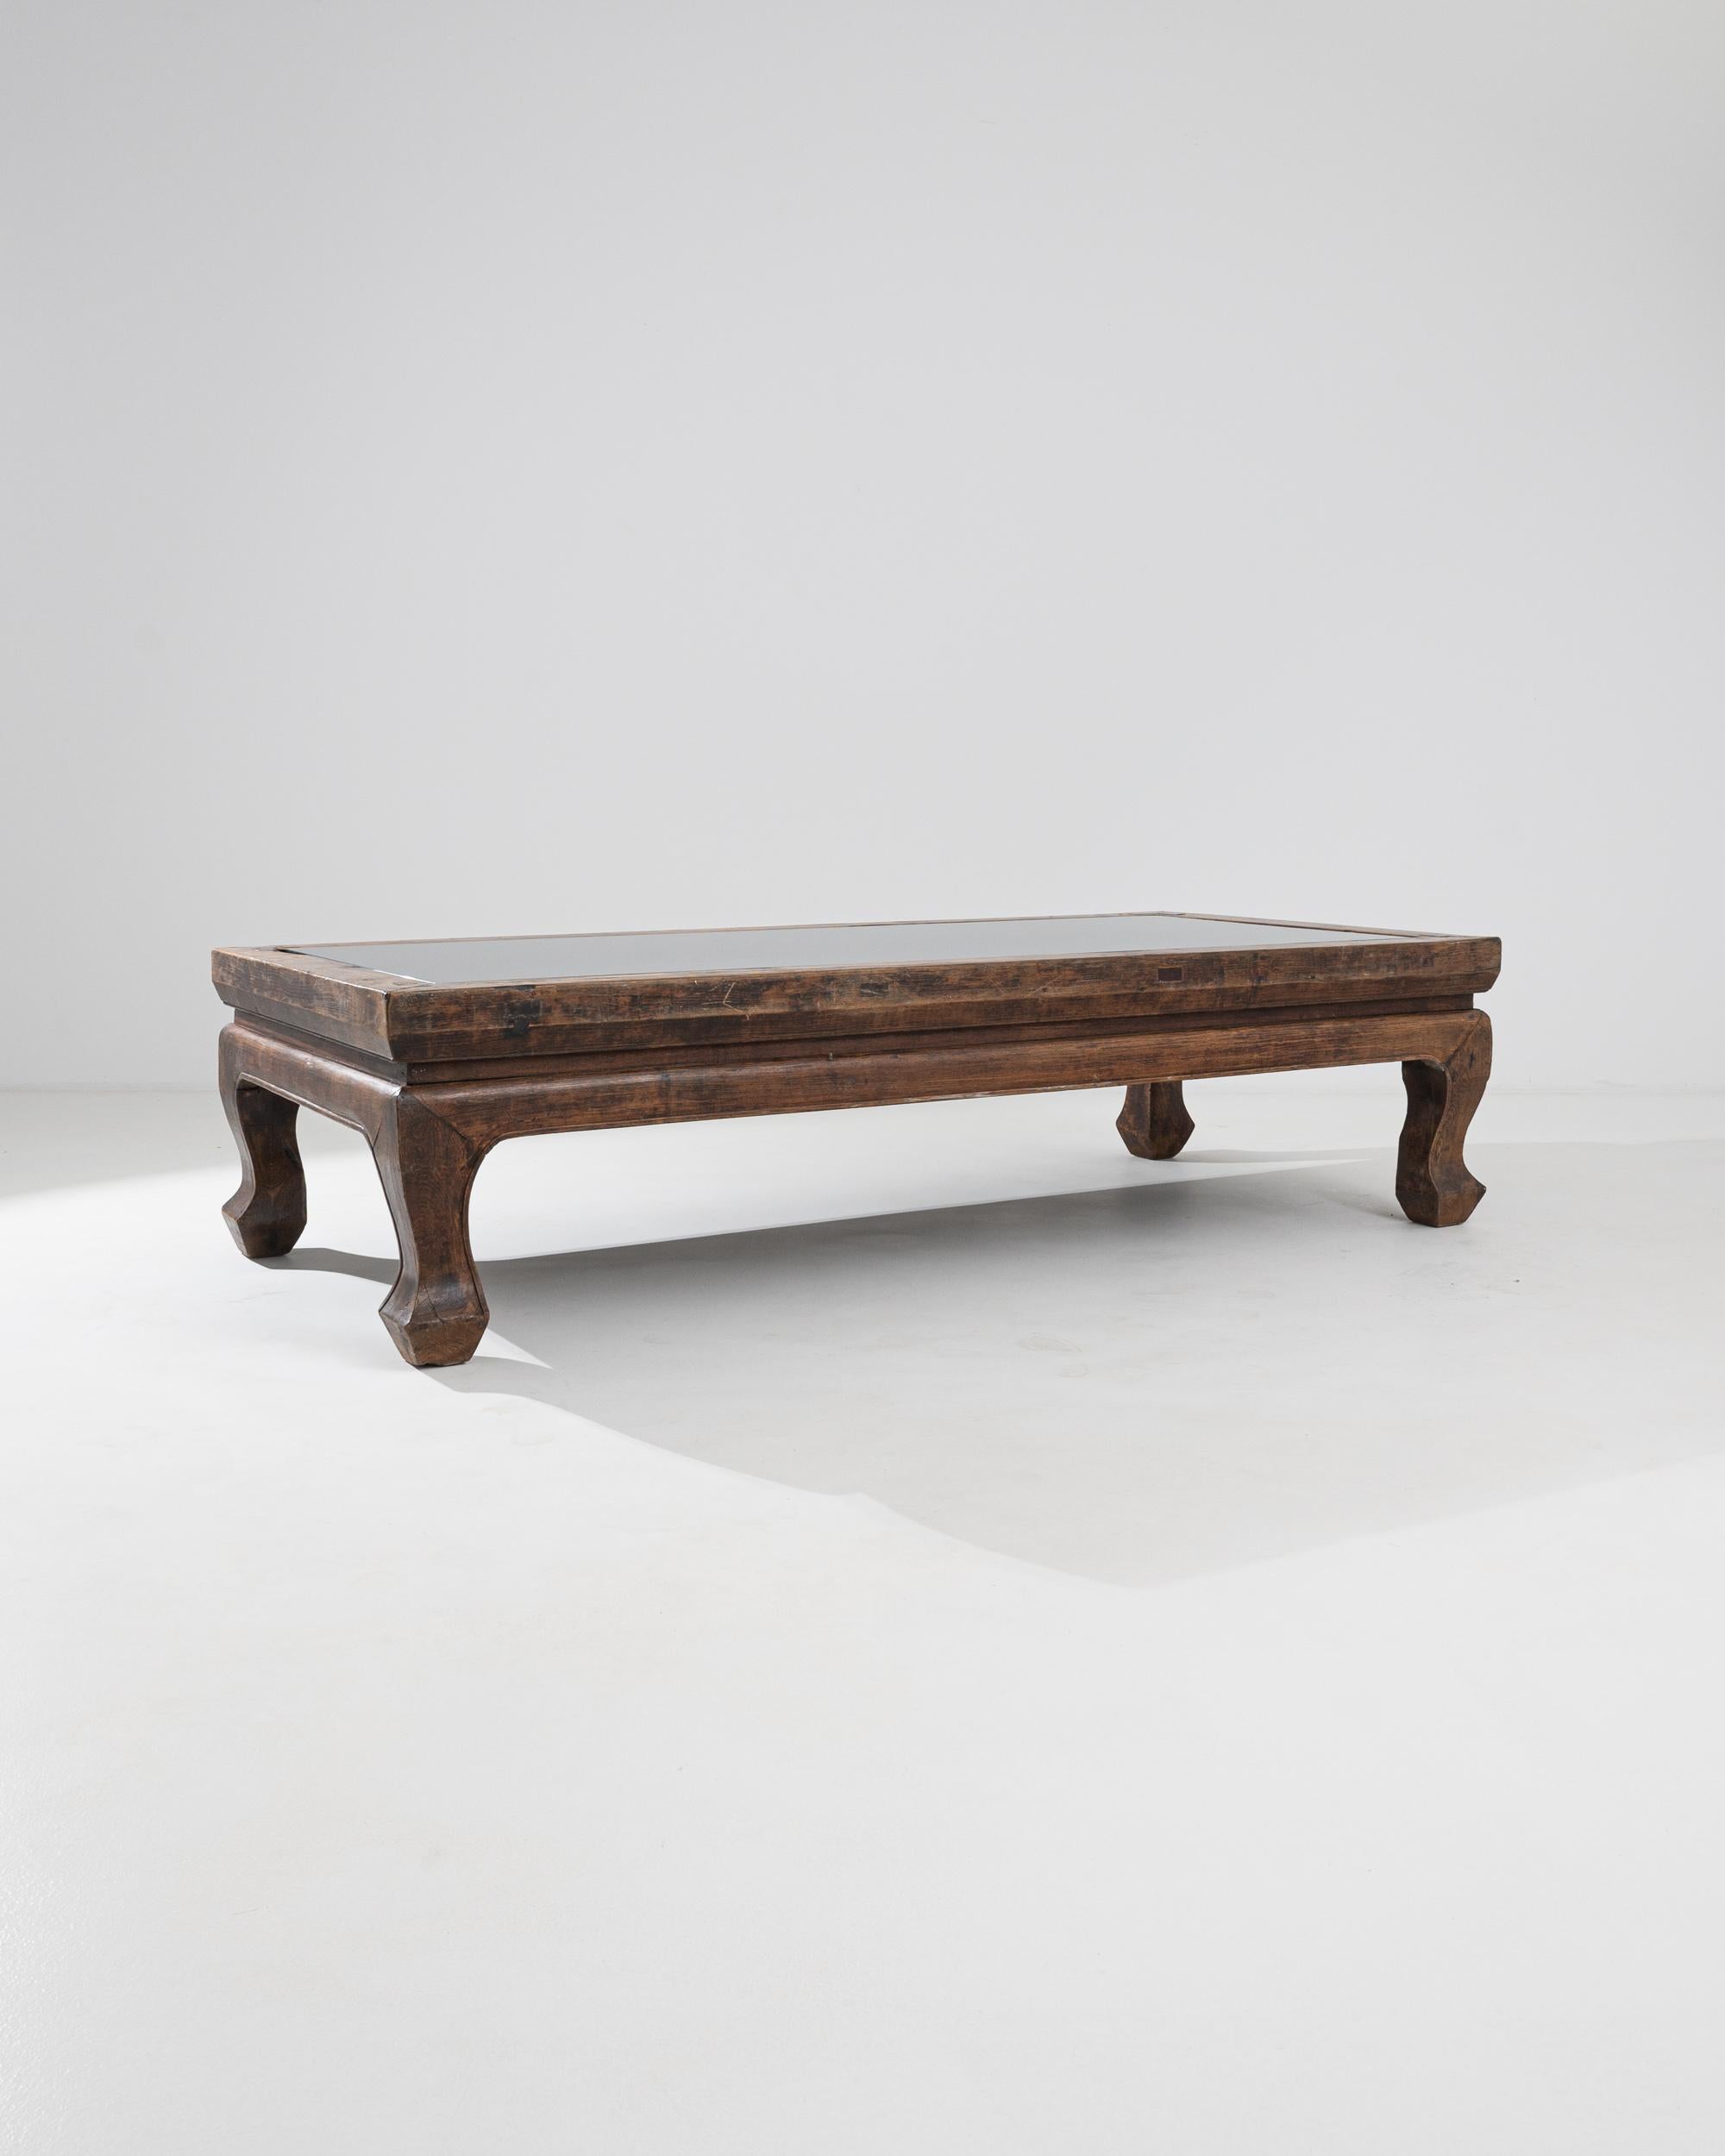 A 19th century Chinese coffee table made from wood and a glass top. This enormous coffee table radiates both a commanding presence as well as a cozy aura. Its thick lumber and gentle curves indicate a sense of confident and keen-eyed craftsmanship.